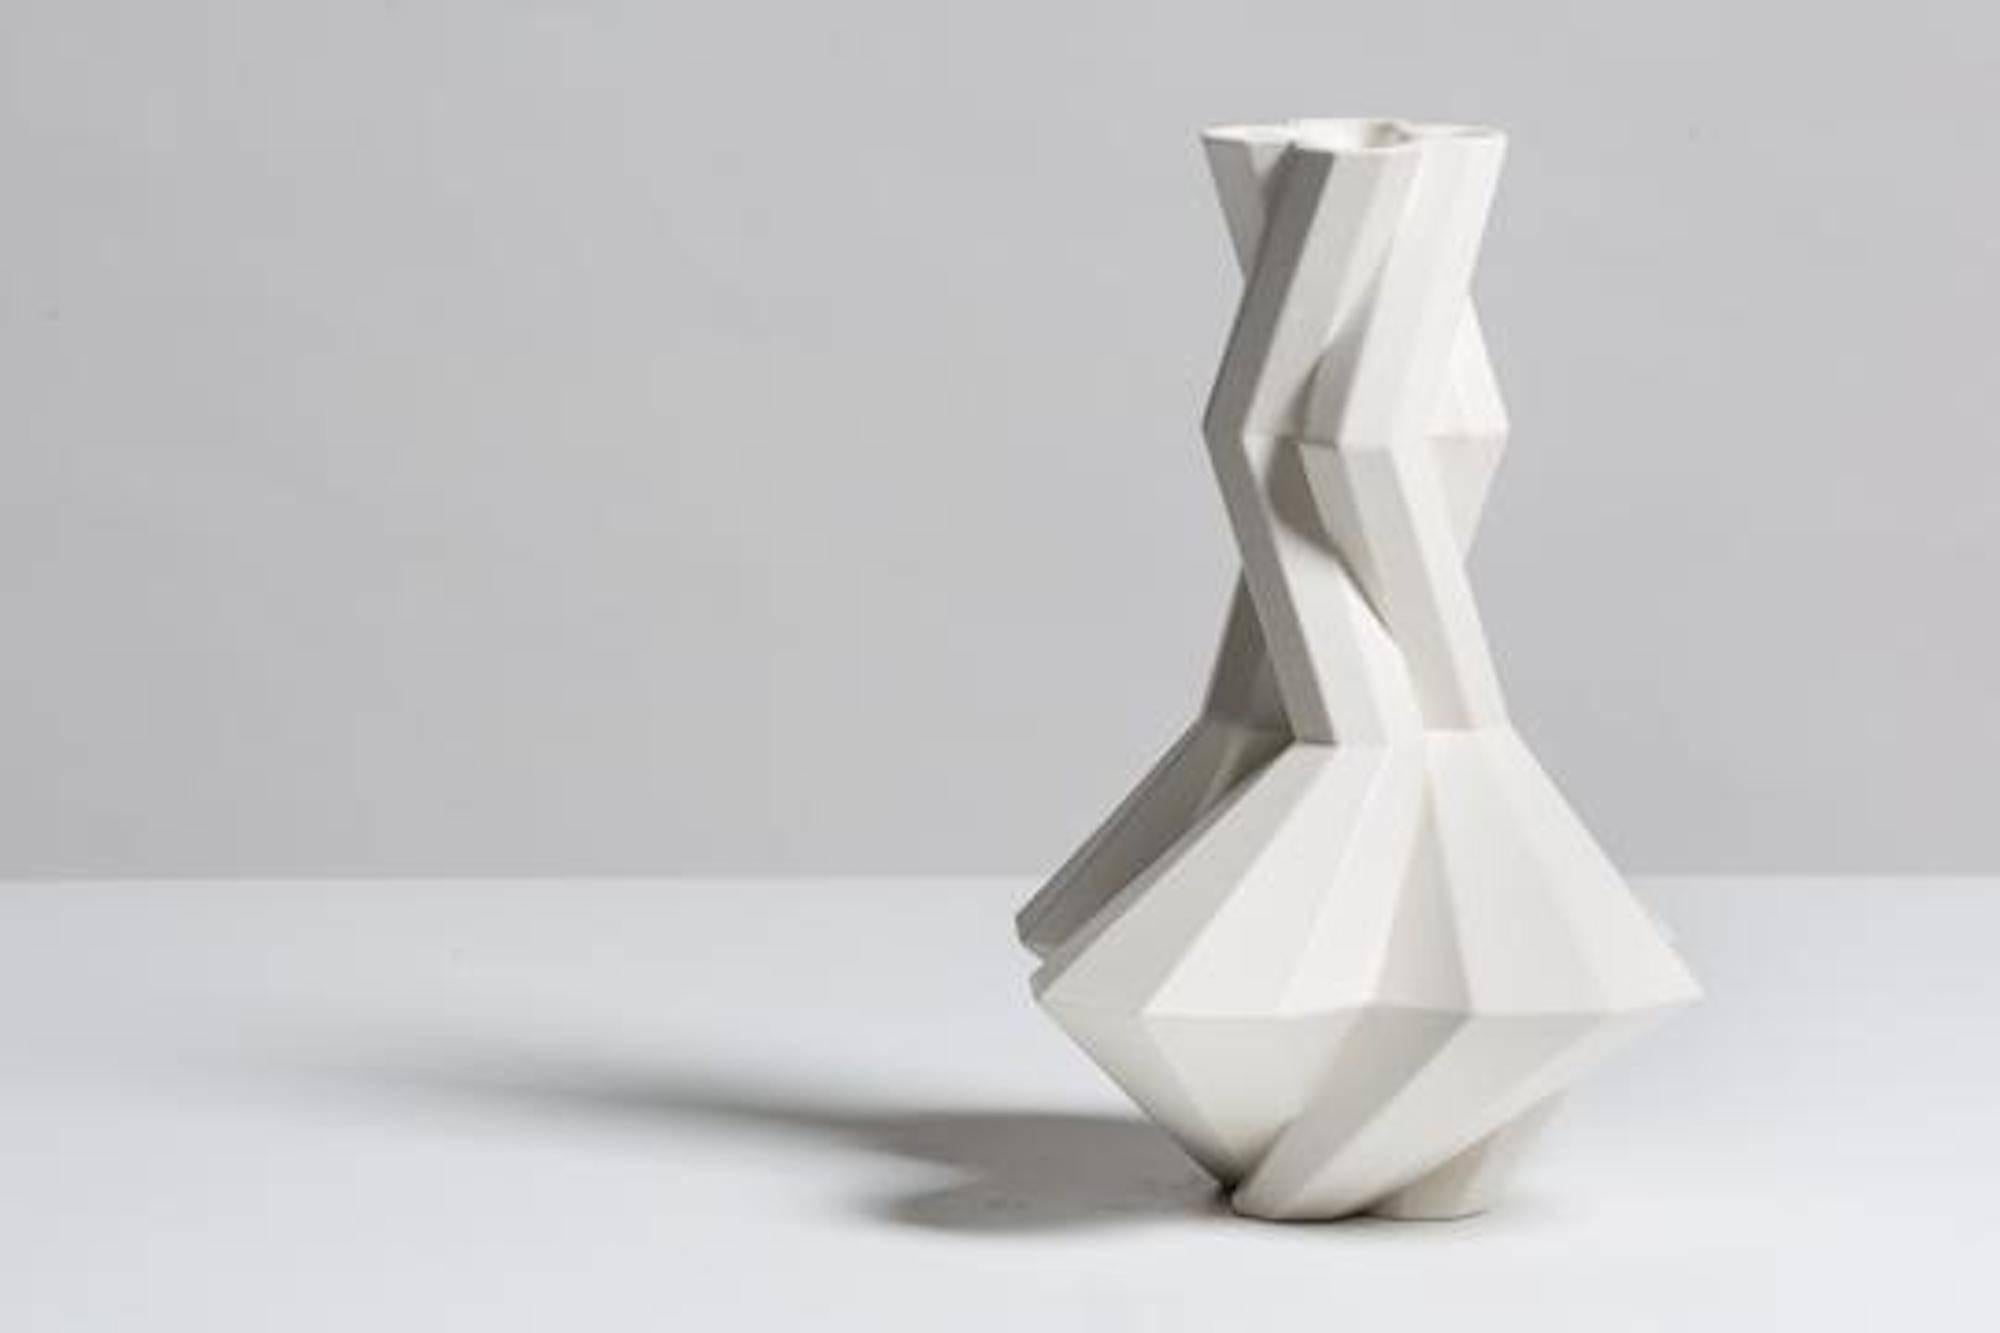 Lara Bohinc continues to work with ancient and futuristic forms with new Fortress designs, further exploring the complex geometry of this range. The hexagonal shapes interlock and embrace, creating a dynamic play of light and shade on the many